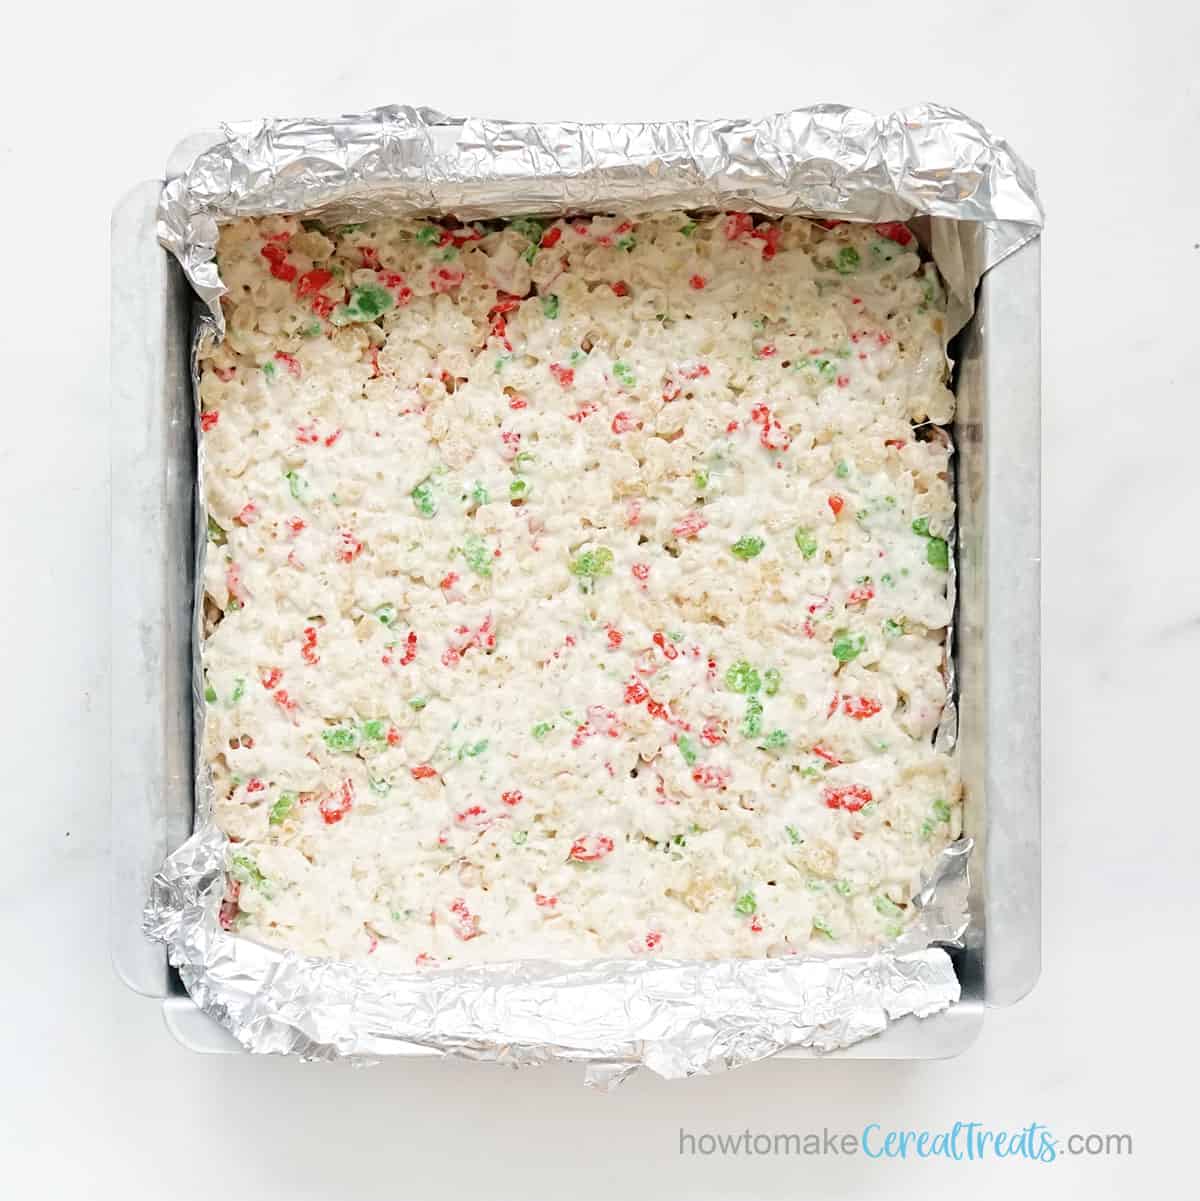 Red and green holiday Rice Krispie Treats in baking pan